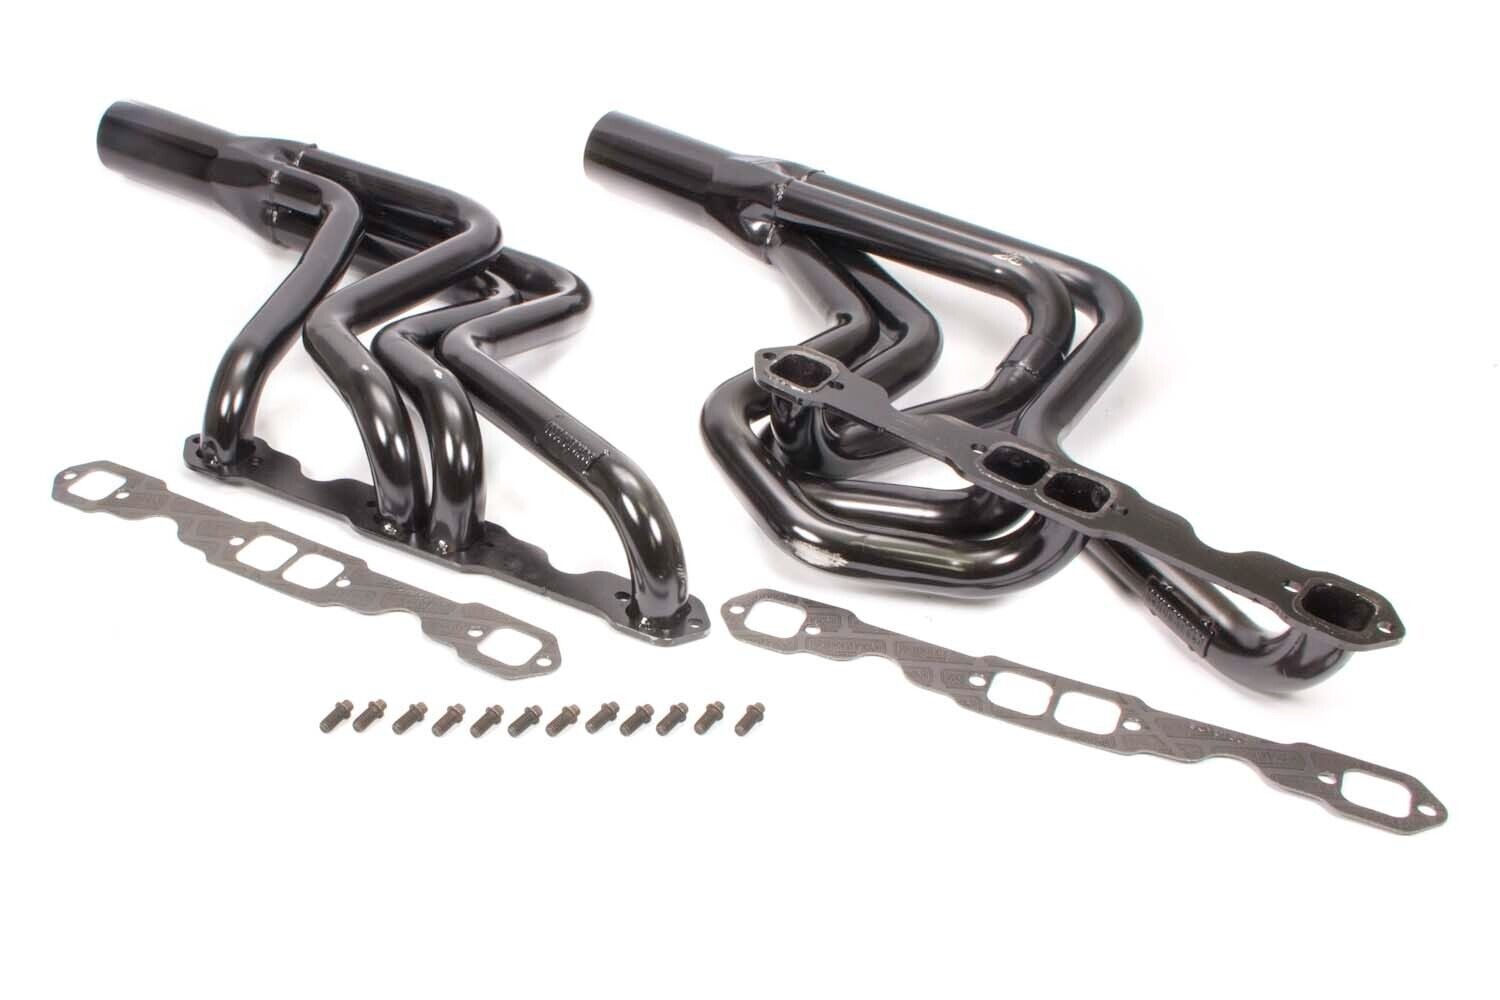 Schoenfeld 185M Street Stock Headers 1.625 for Small Block Chevy A F G Body